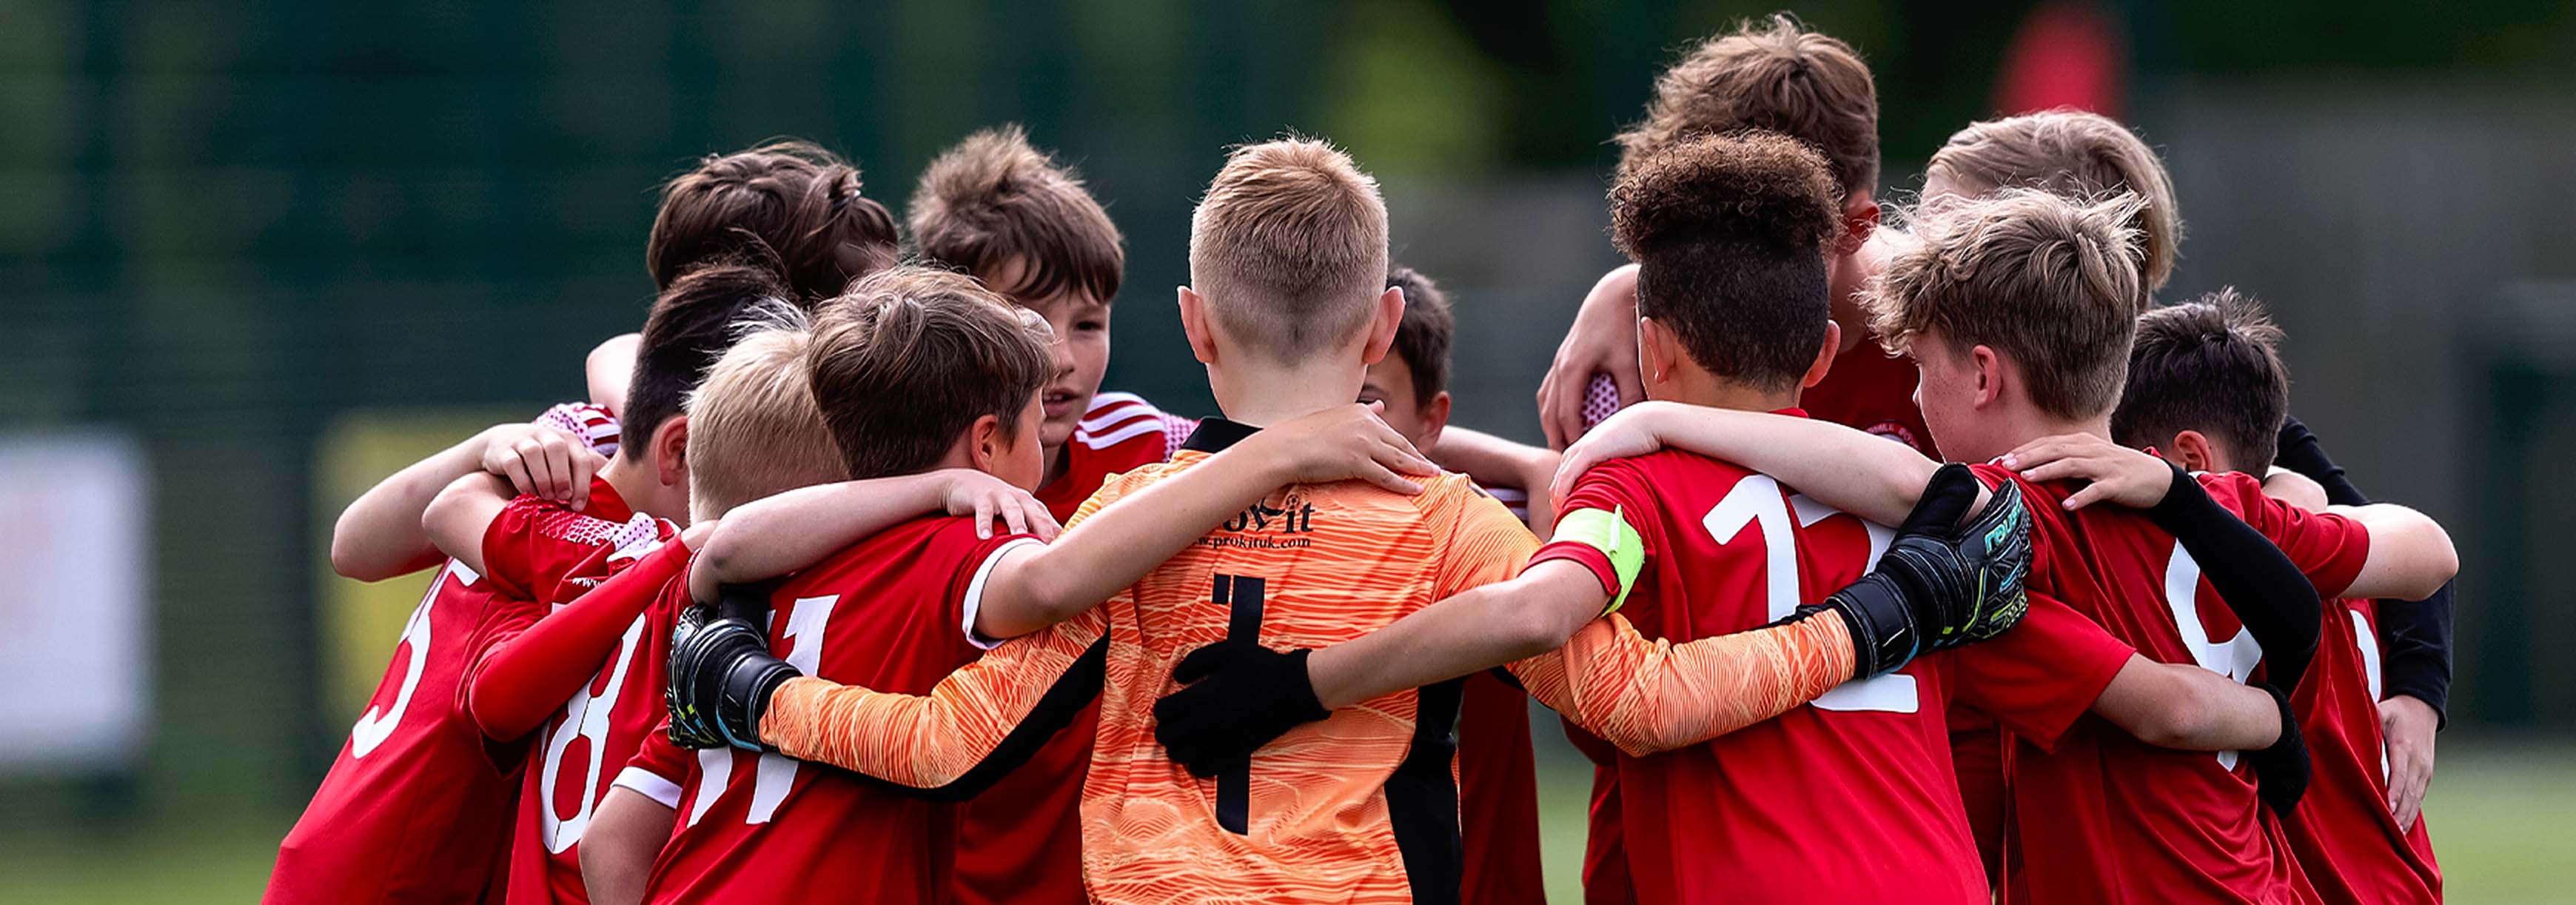 A group of young players huddle together